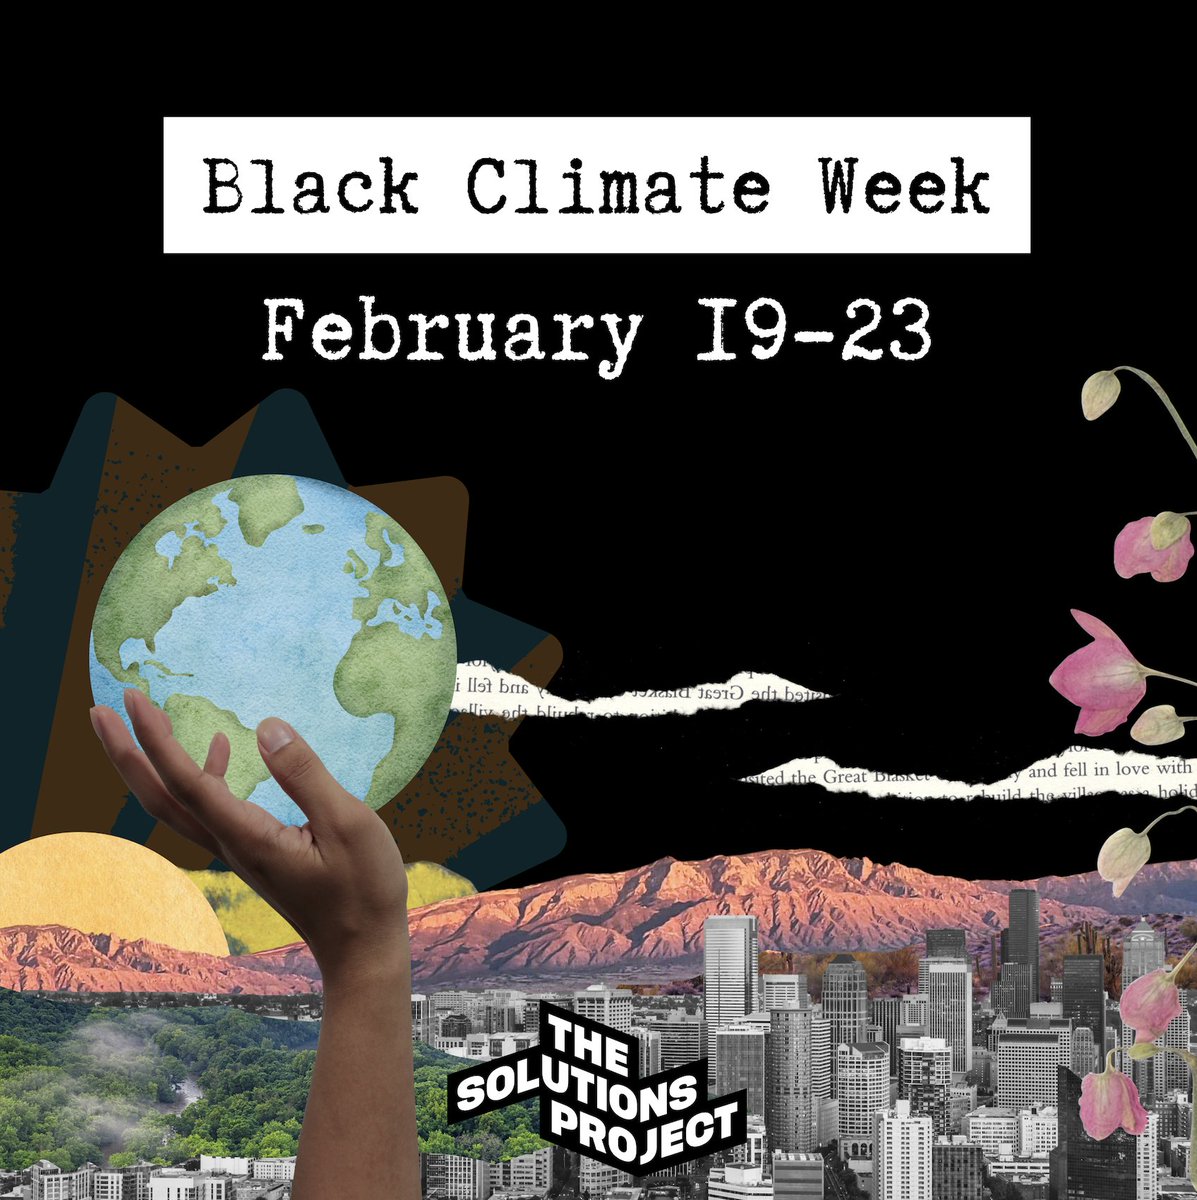 #BlackClimateWeek is almost here! As climate action rises in importance across all communities, a spotlight on Black communities & leaders advancing a just transition to an equitable and regenerative economy offers a powerful path forward. 👉🏾 Stay Tuned: bit.ly/3HnNEwI